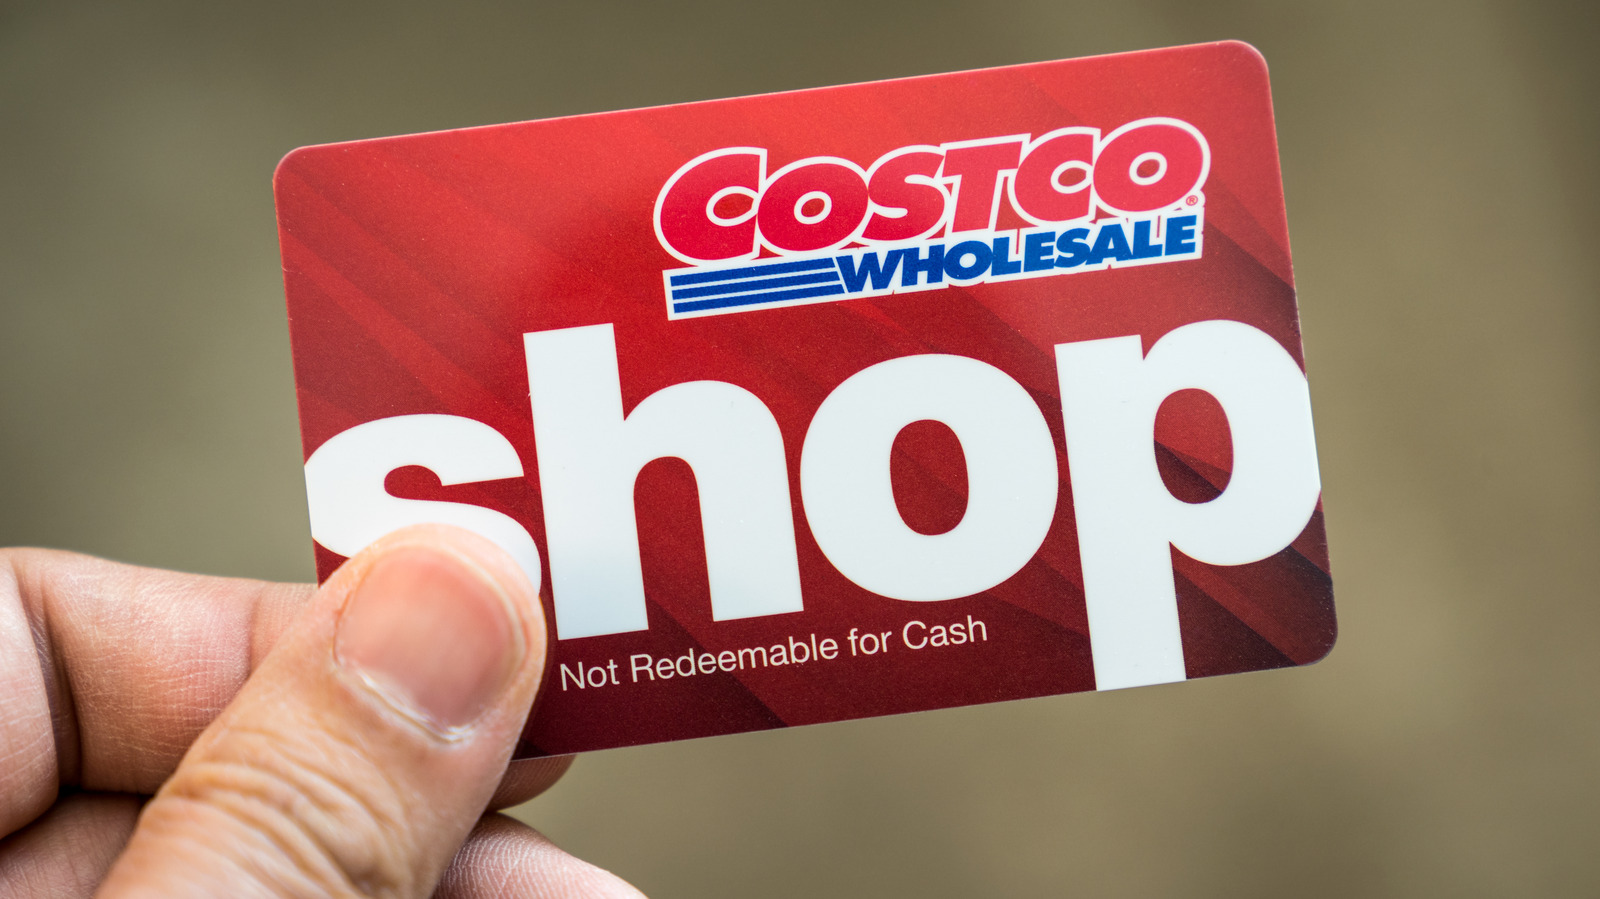 What Is A Costco Shop Card And How Does It Work?